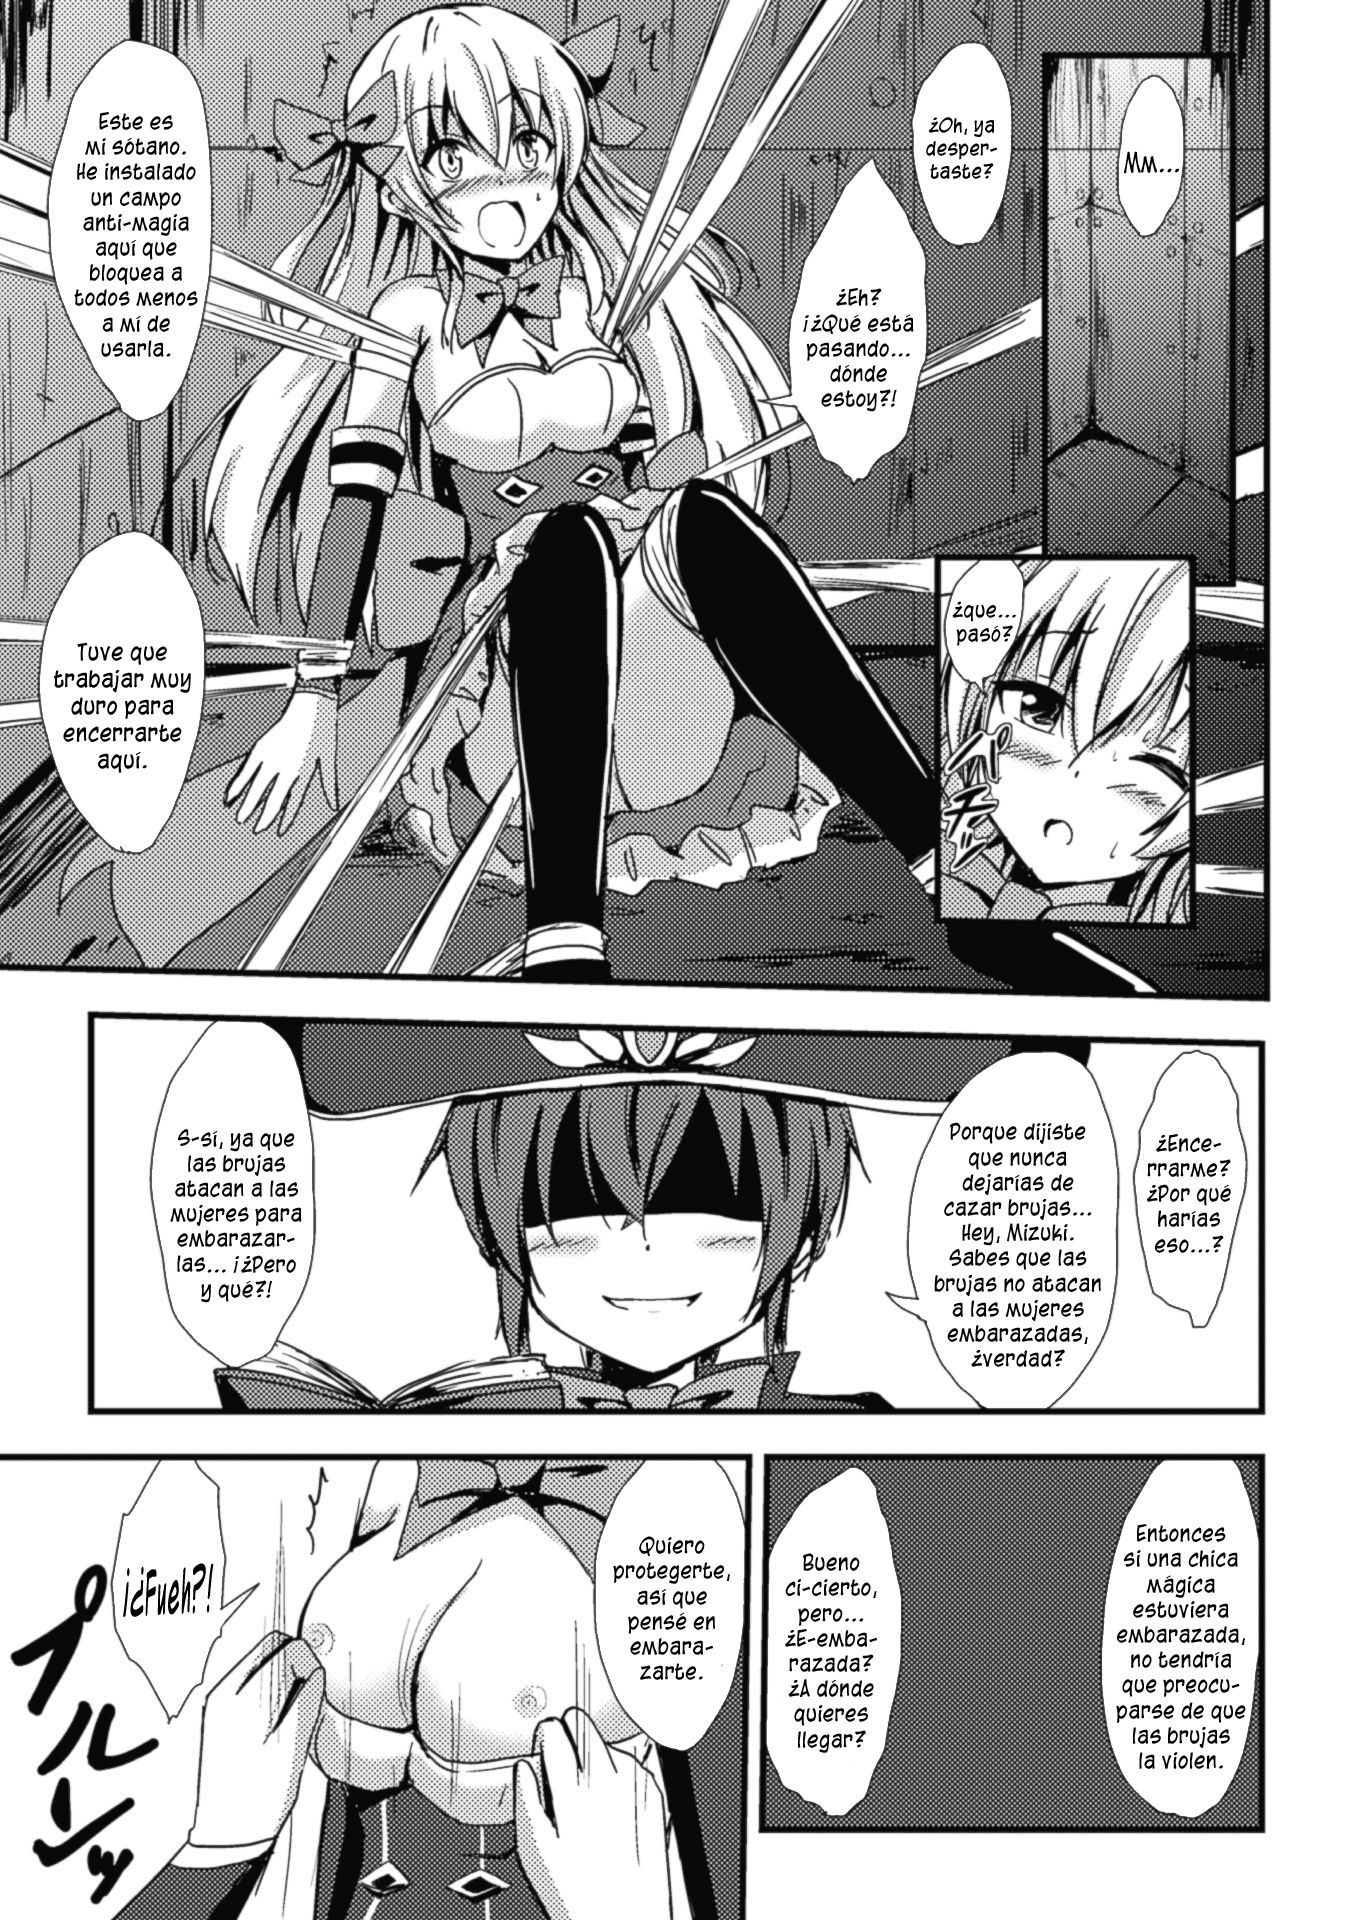 The Magical Girl and the Cage of Lesbianism - 4